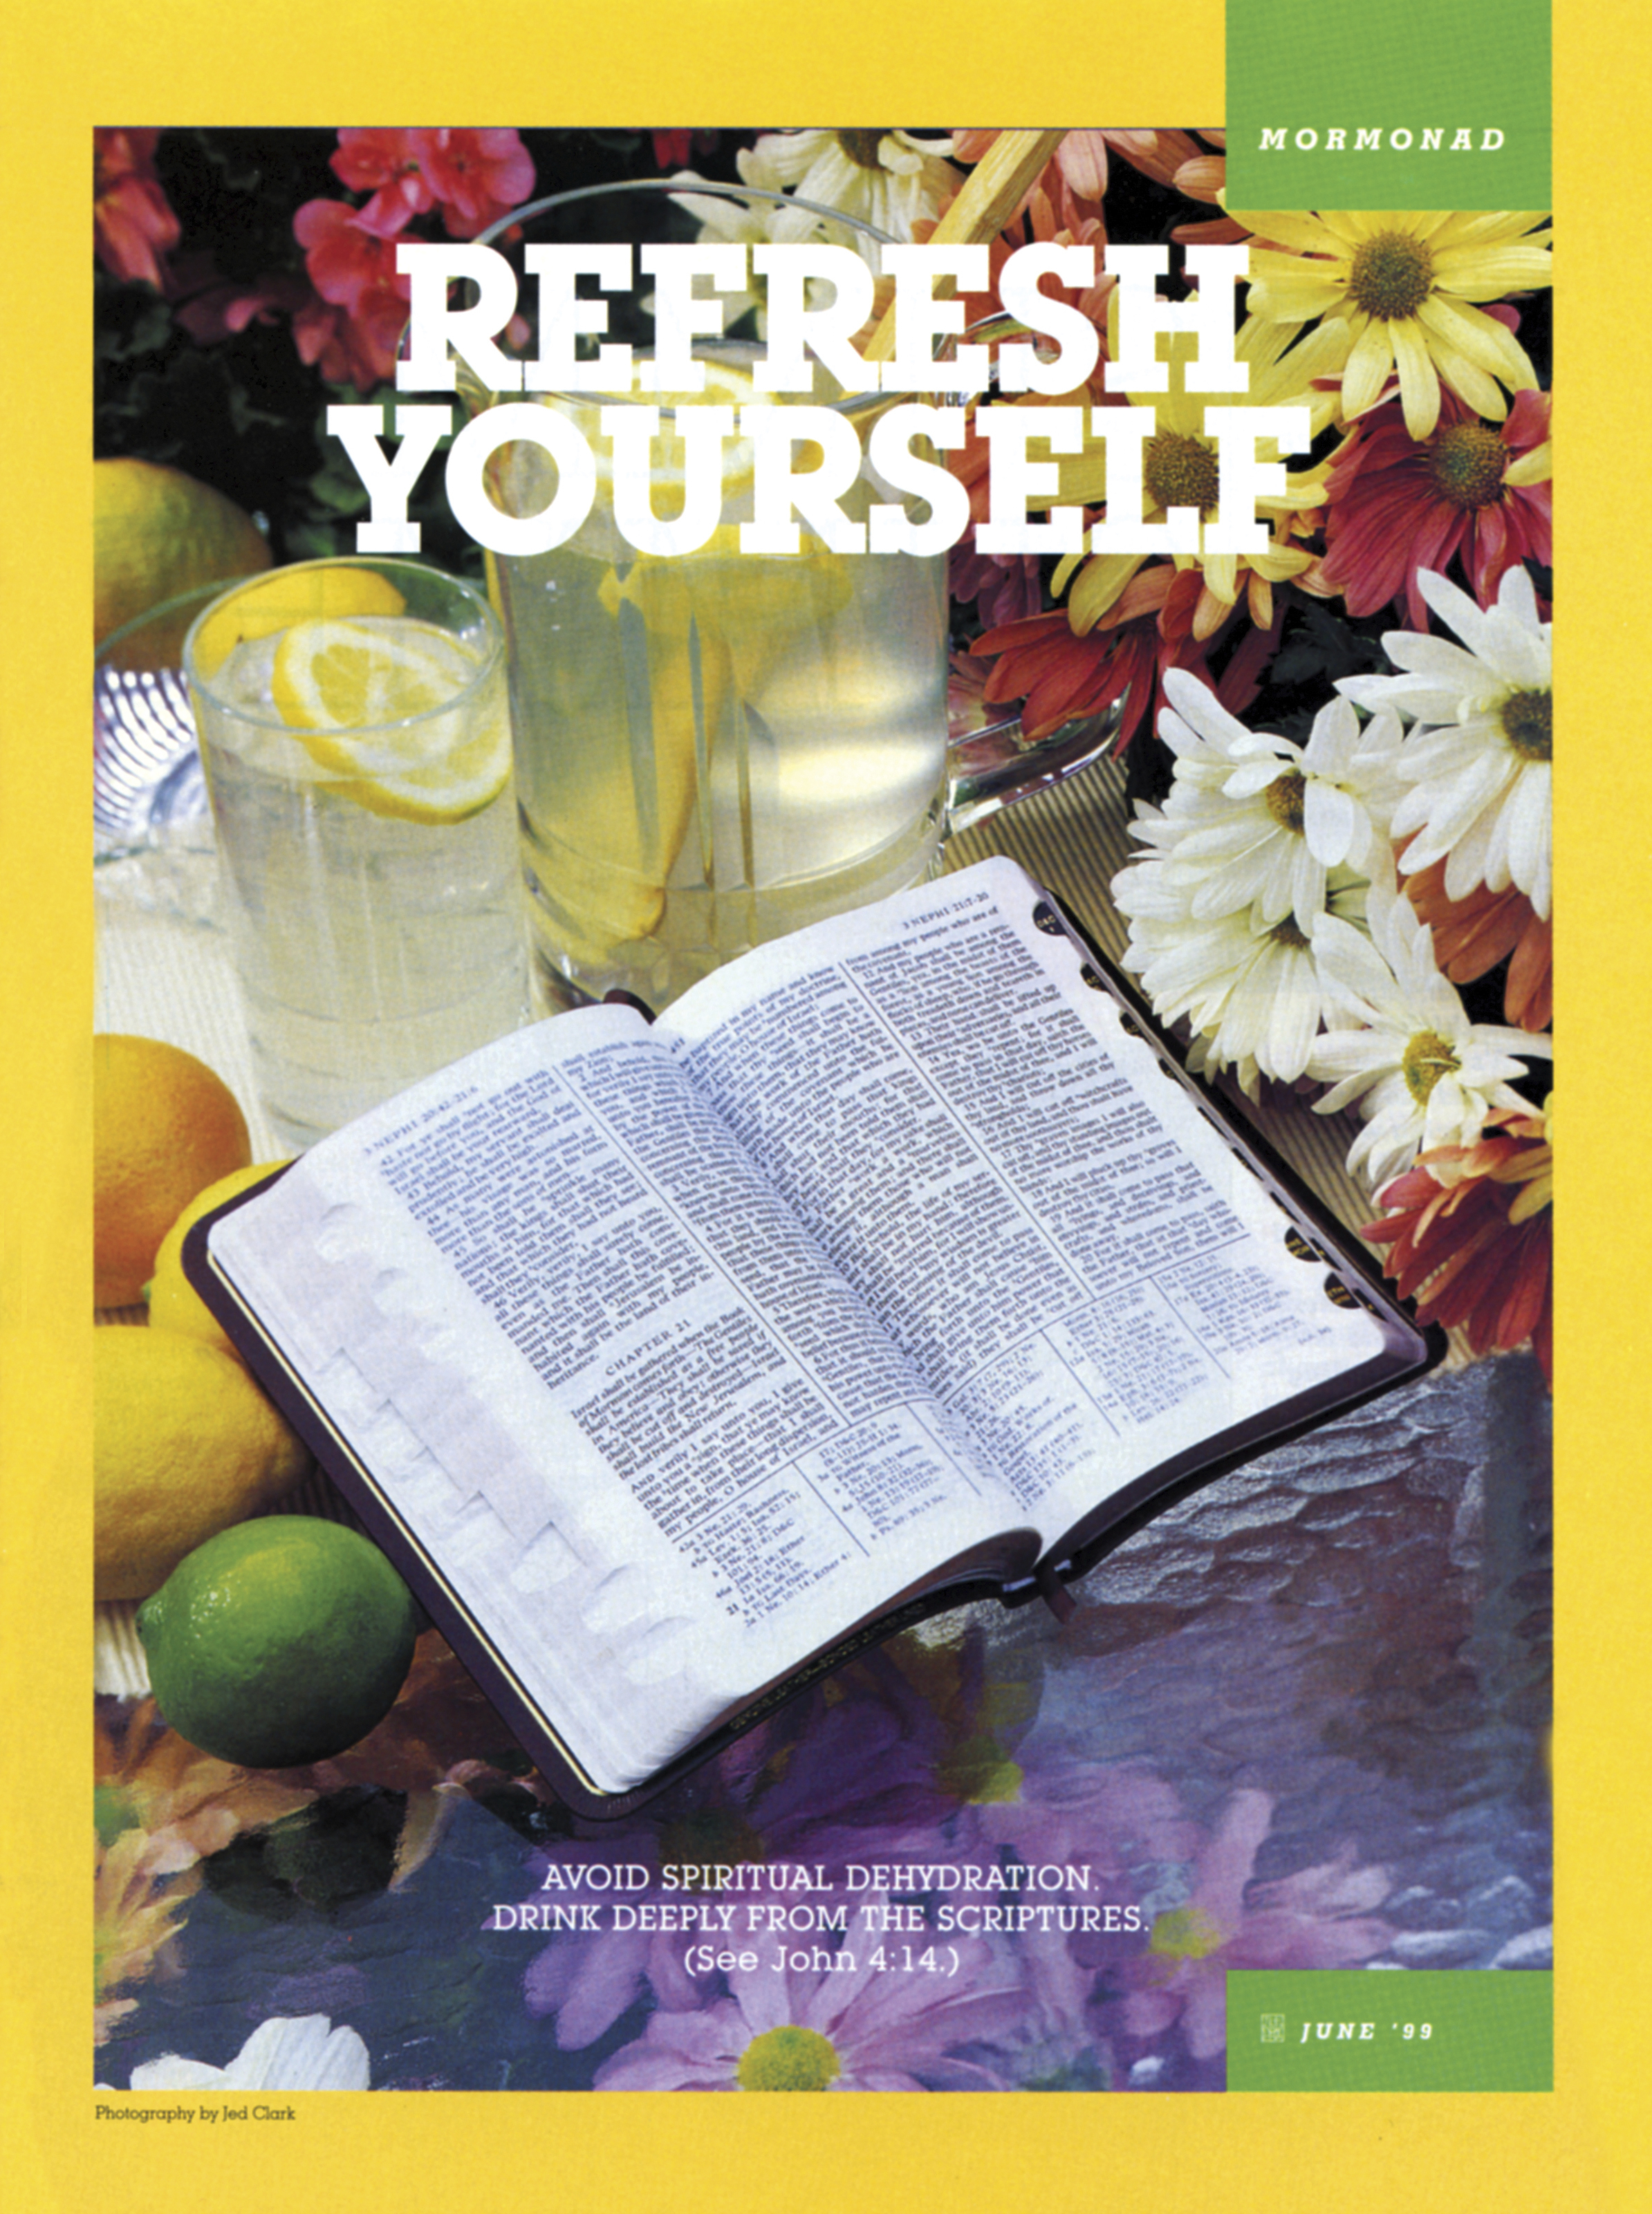 Refresh Yourself. Avoid spiritual dehydration. Drink deeply from the scriptures. (See John 4:14.) June 1999 © undefined ipCode 1.